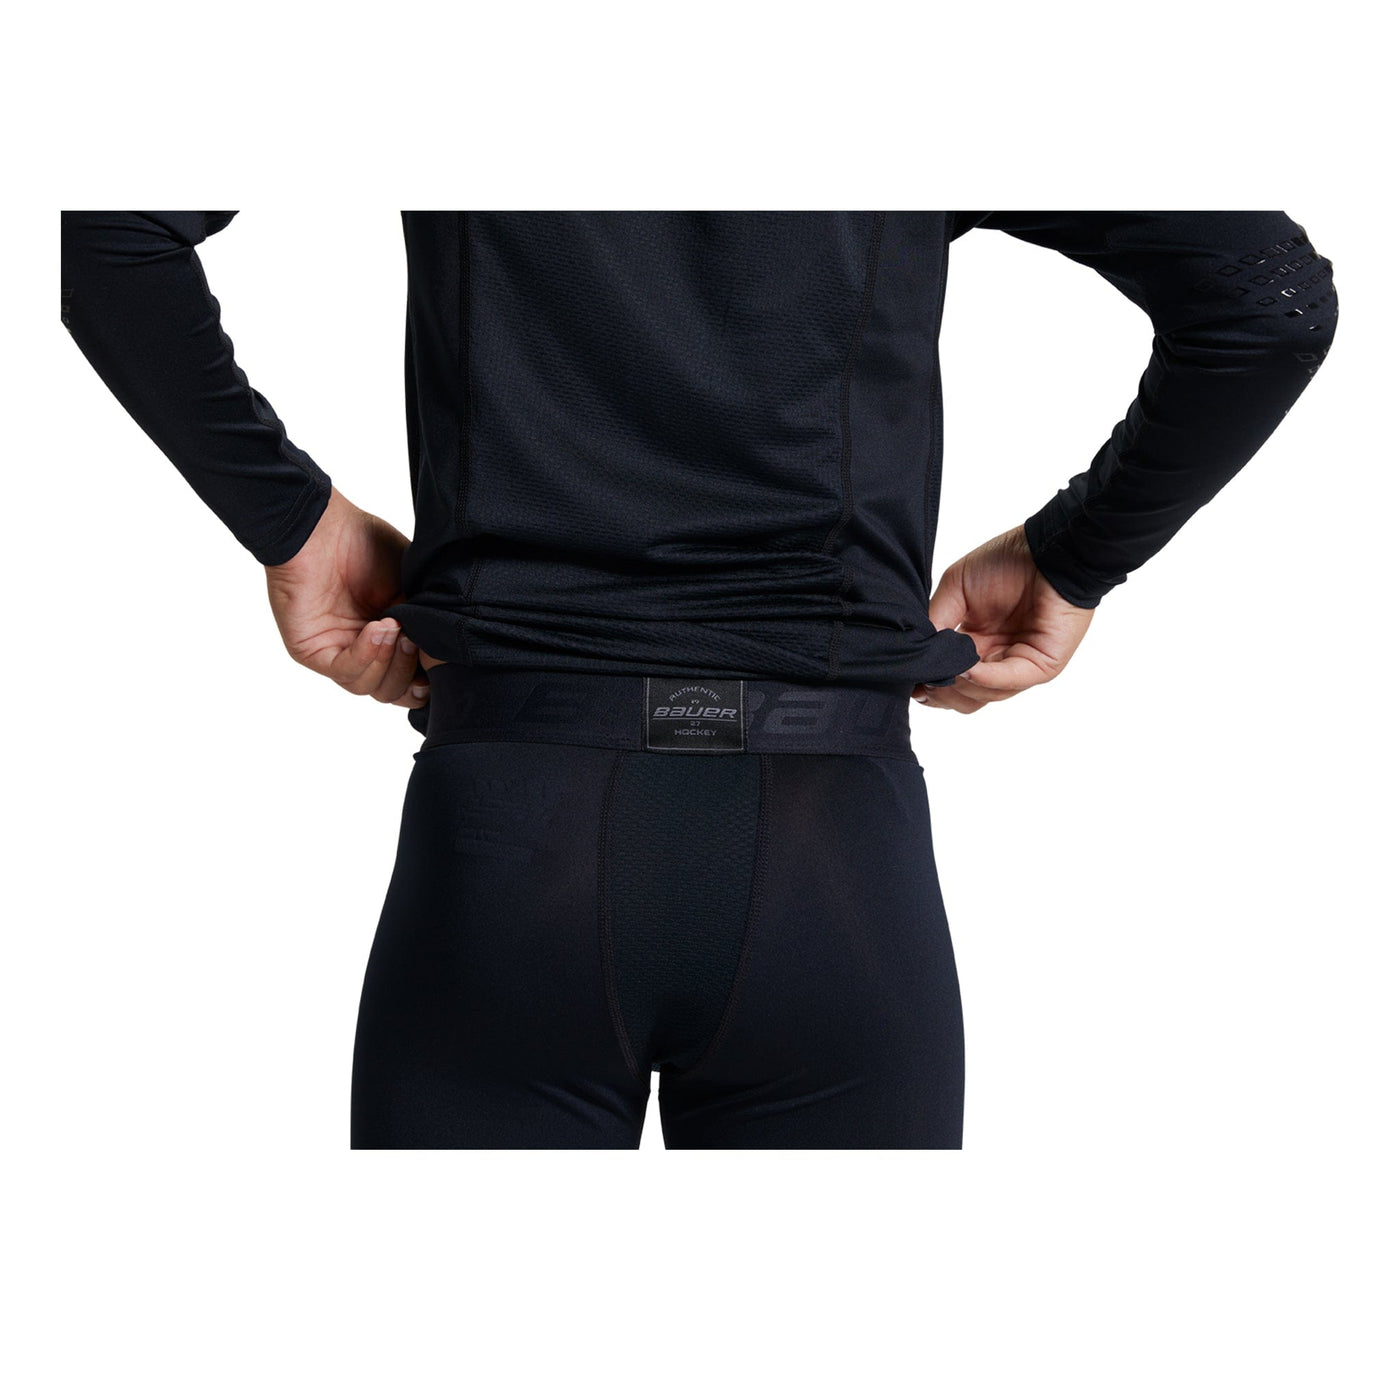 Bauer Pro Senior Baselayer Pants - The Hockey Shop Source For Sports